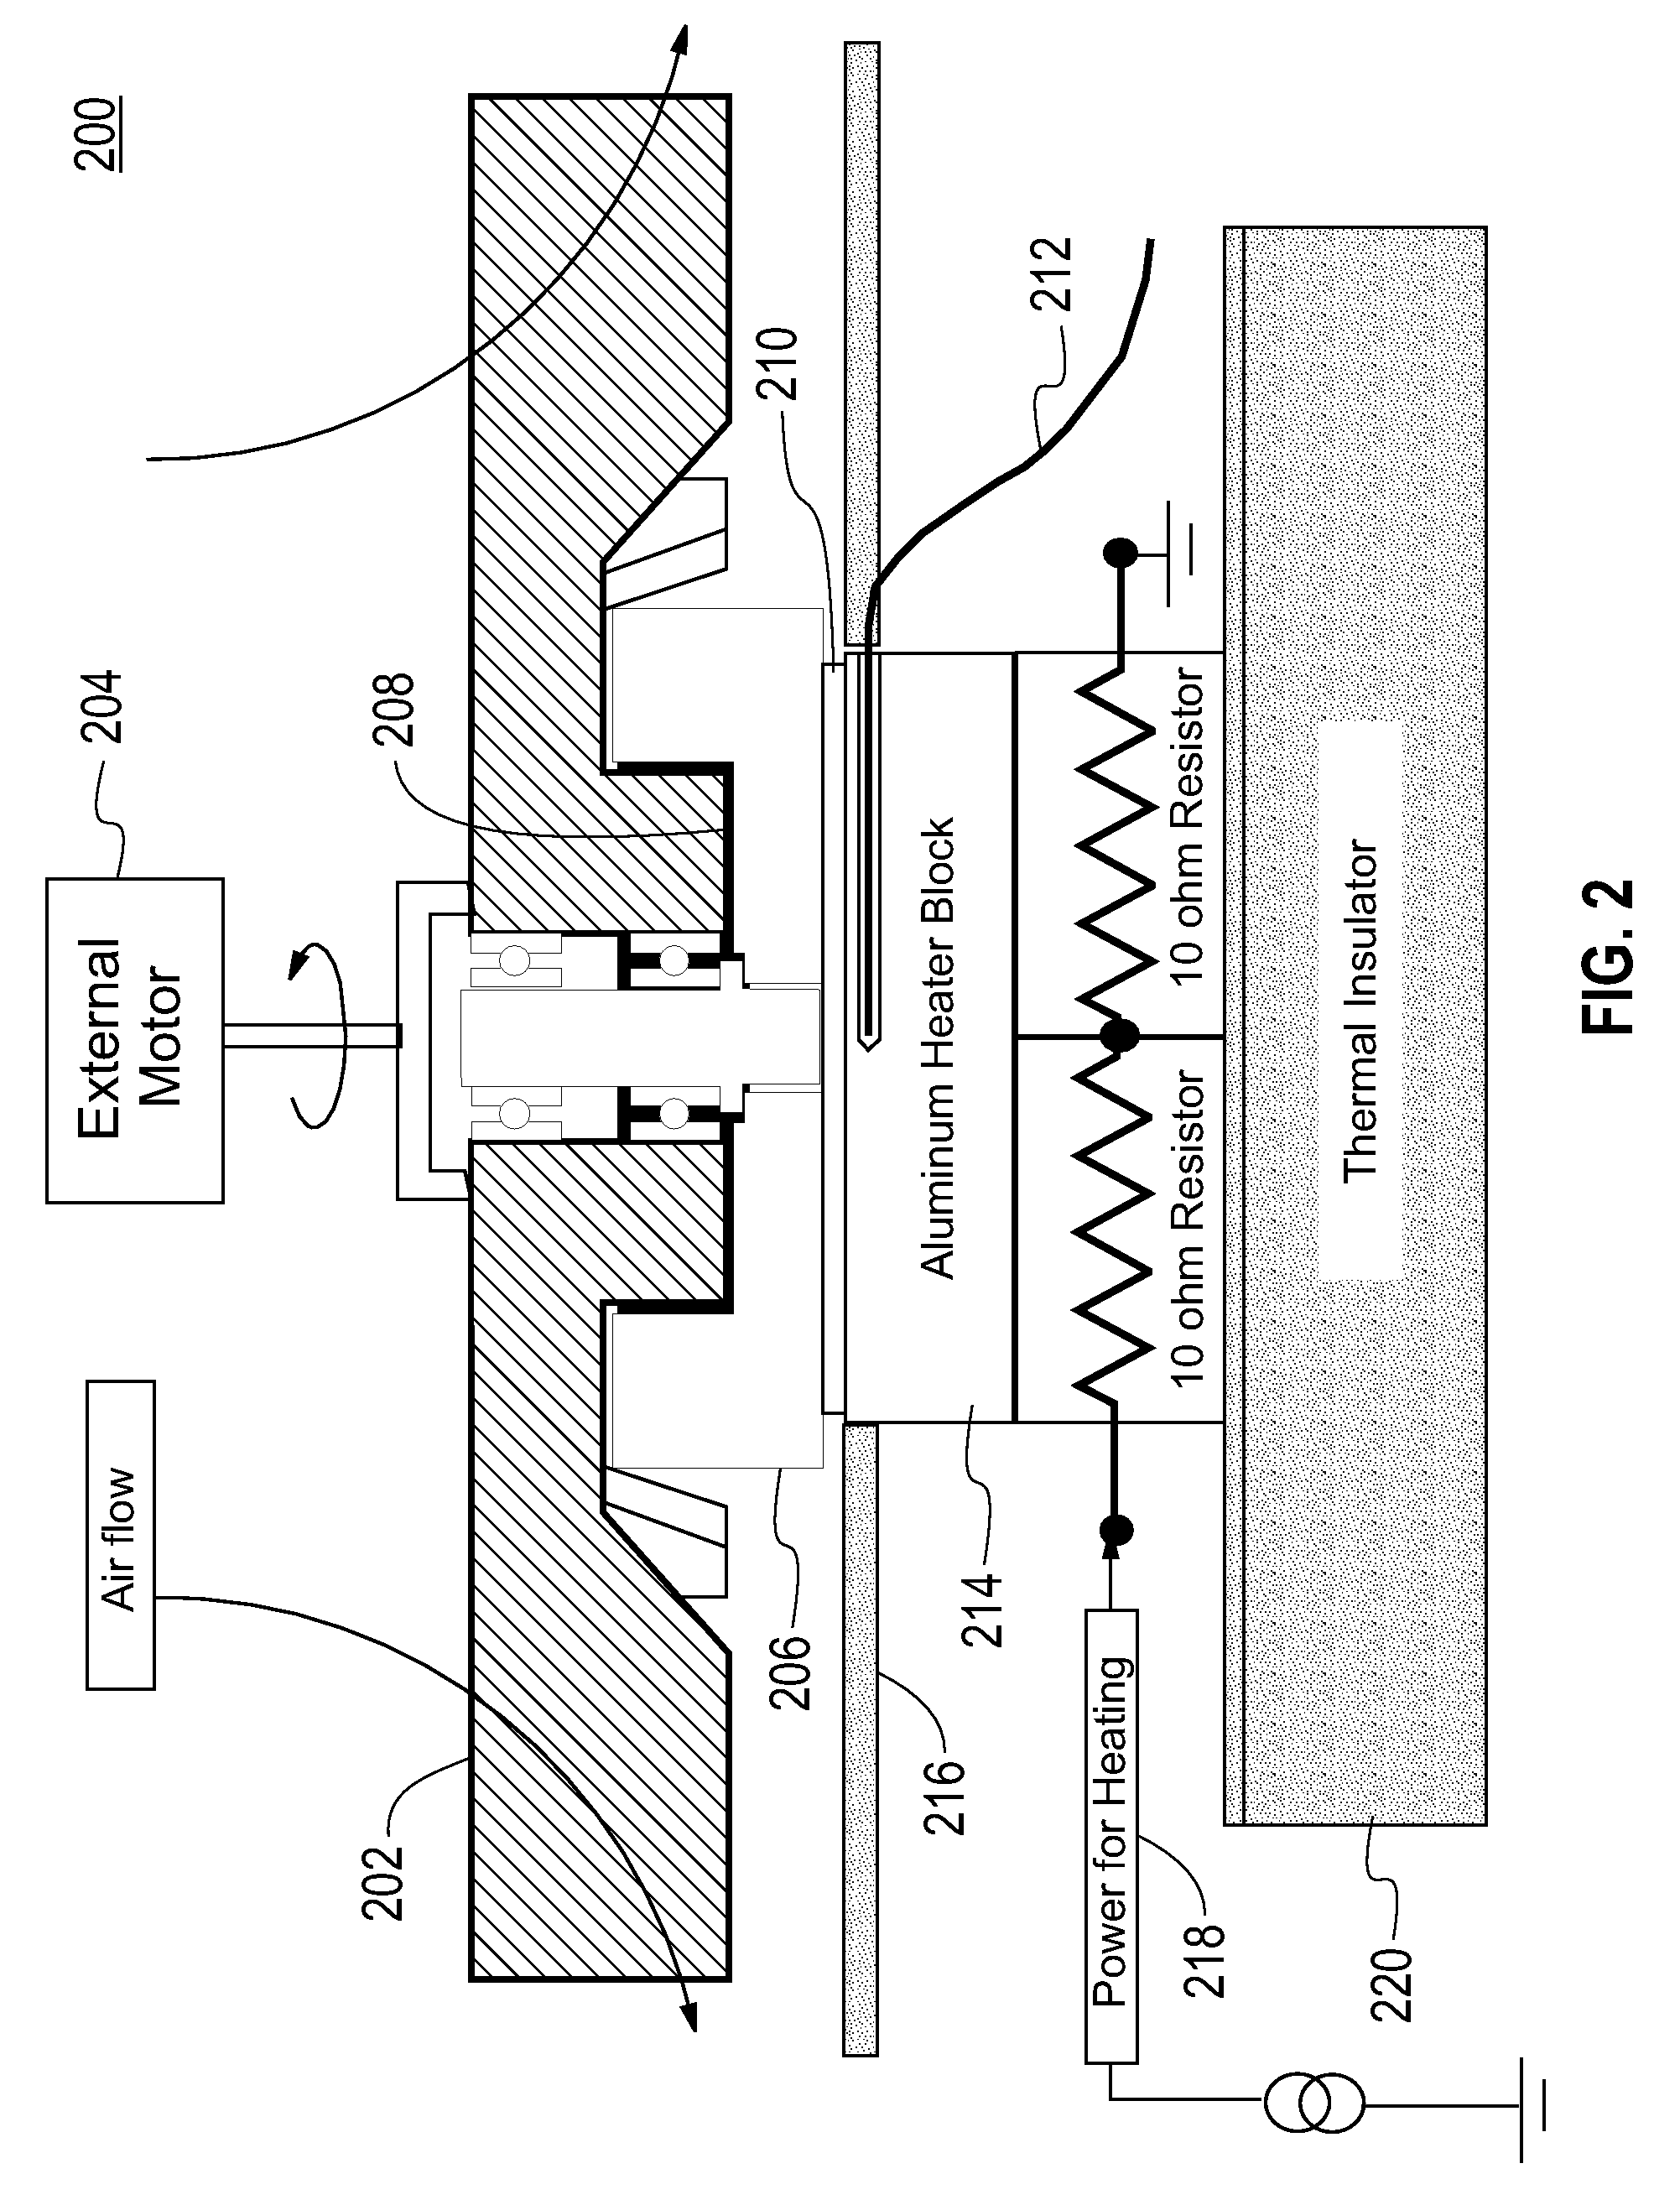 Heat transfer device in a rotating structure